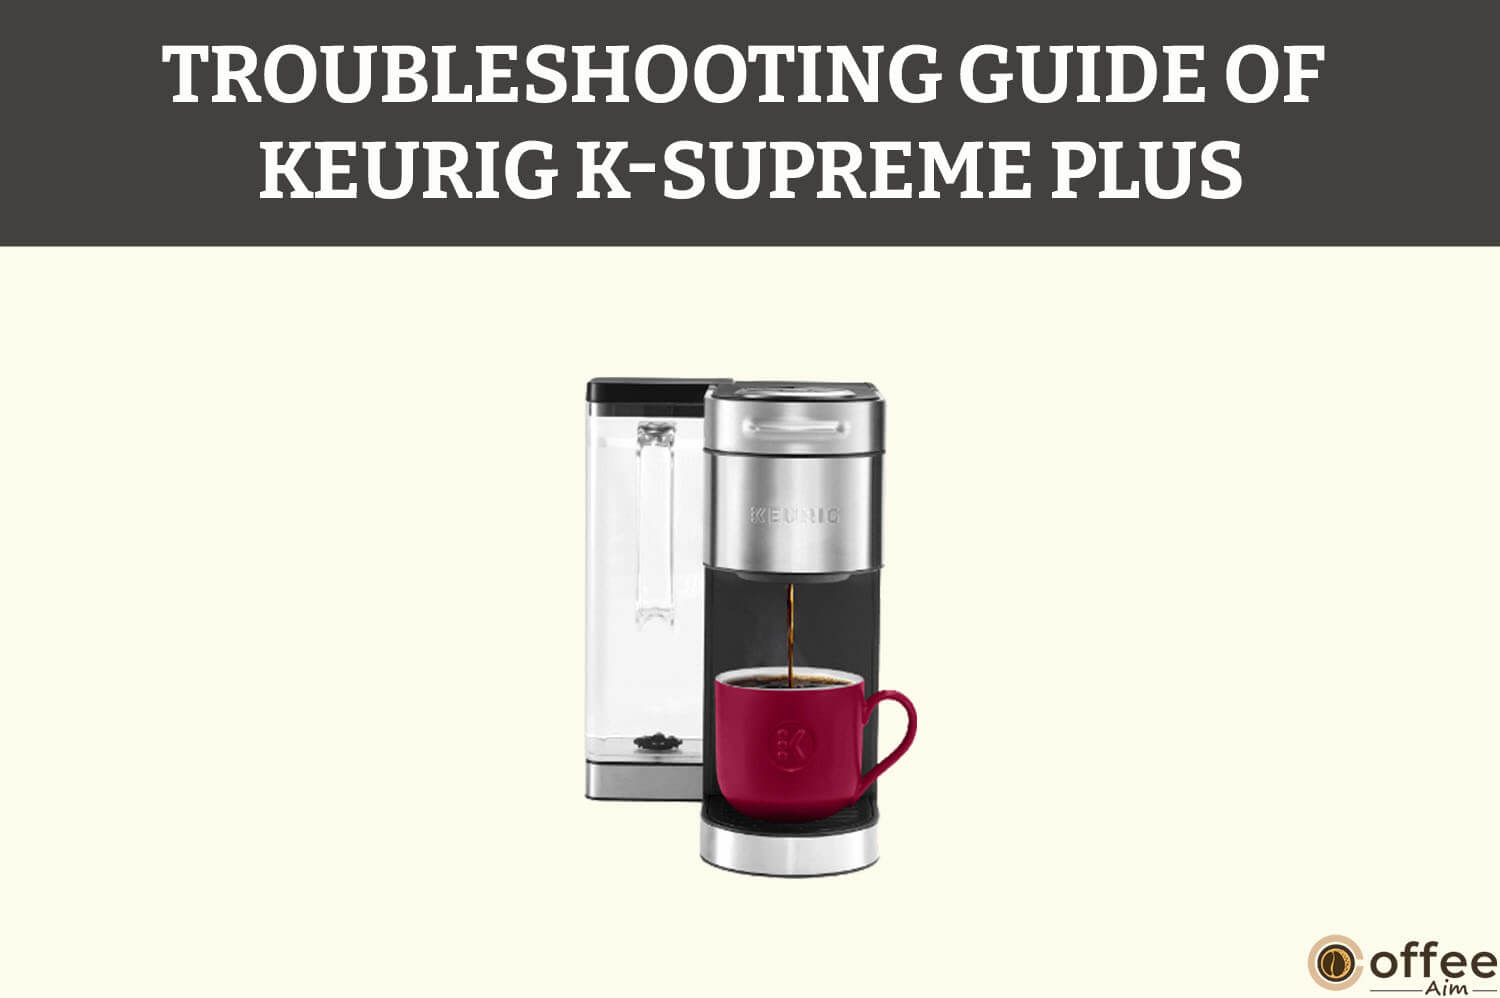 Featured image for the article "Troubleshooting of Keurig K-Supreme Plus"